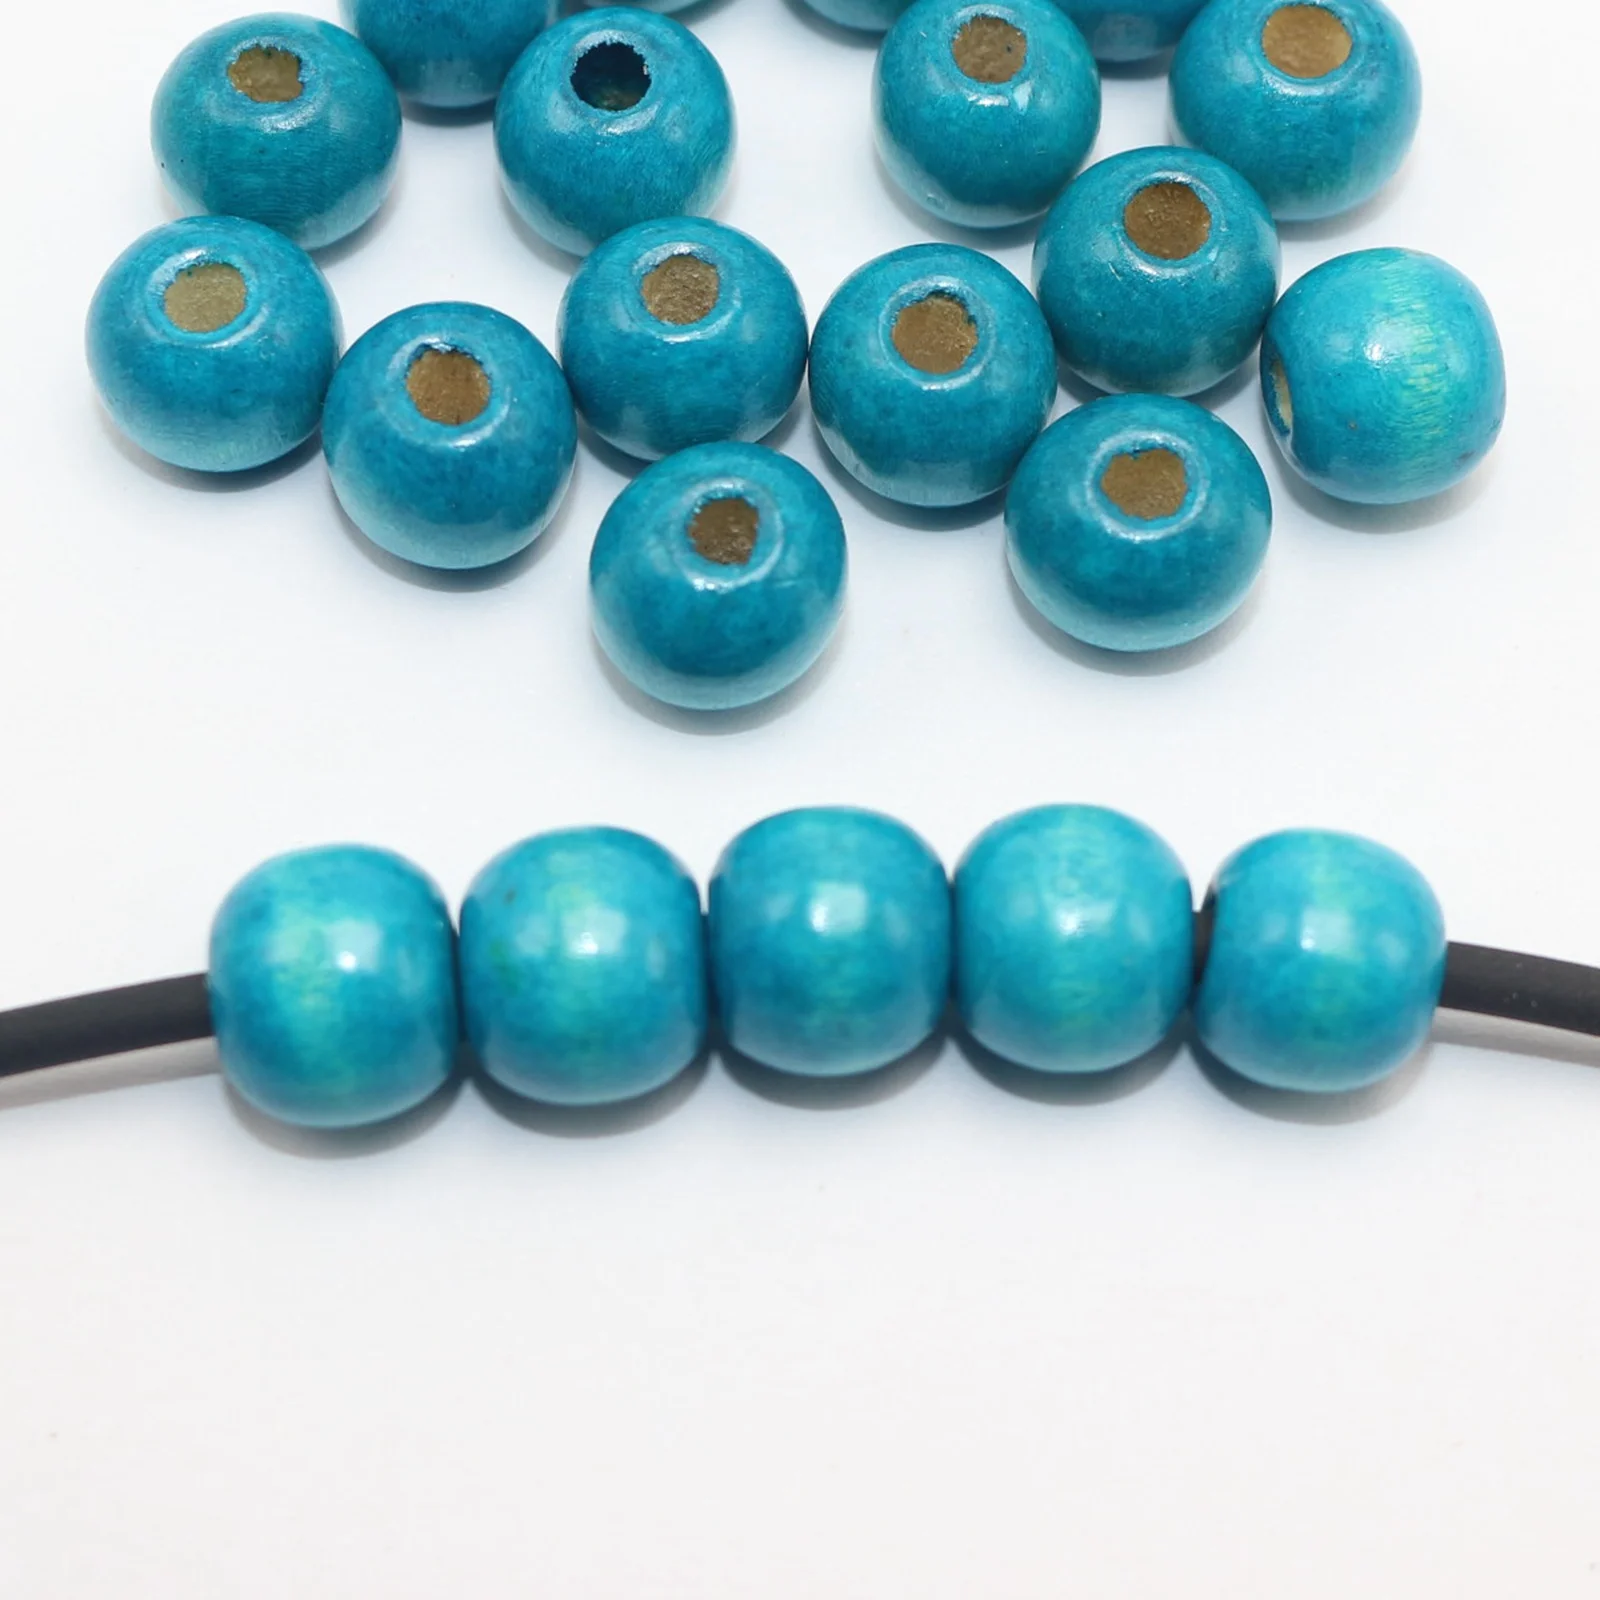 15mm Teal Wood Beads with 5mm Hole for Craft, Large Hole Macrame Beads,  50pcs